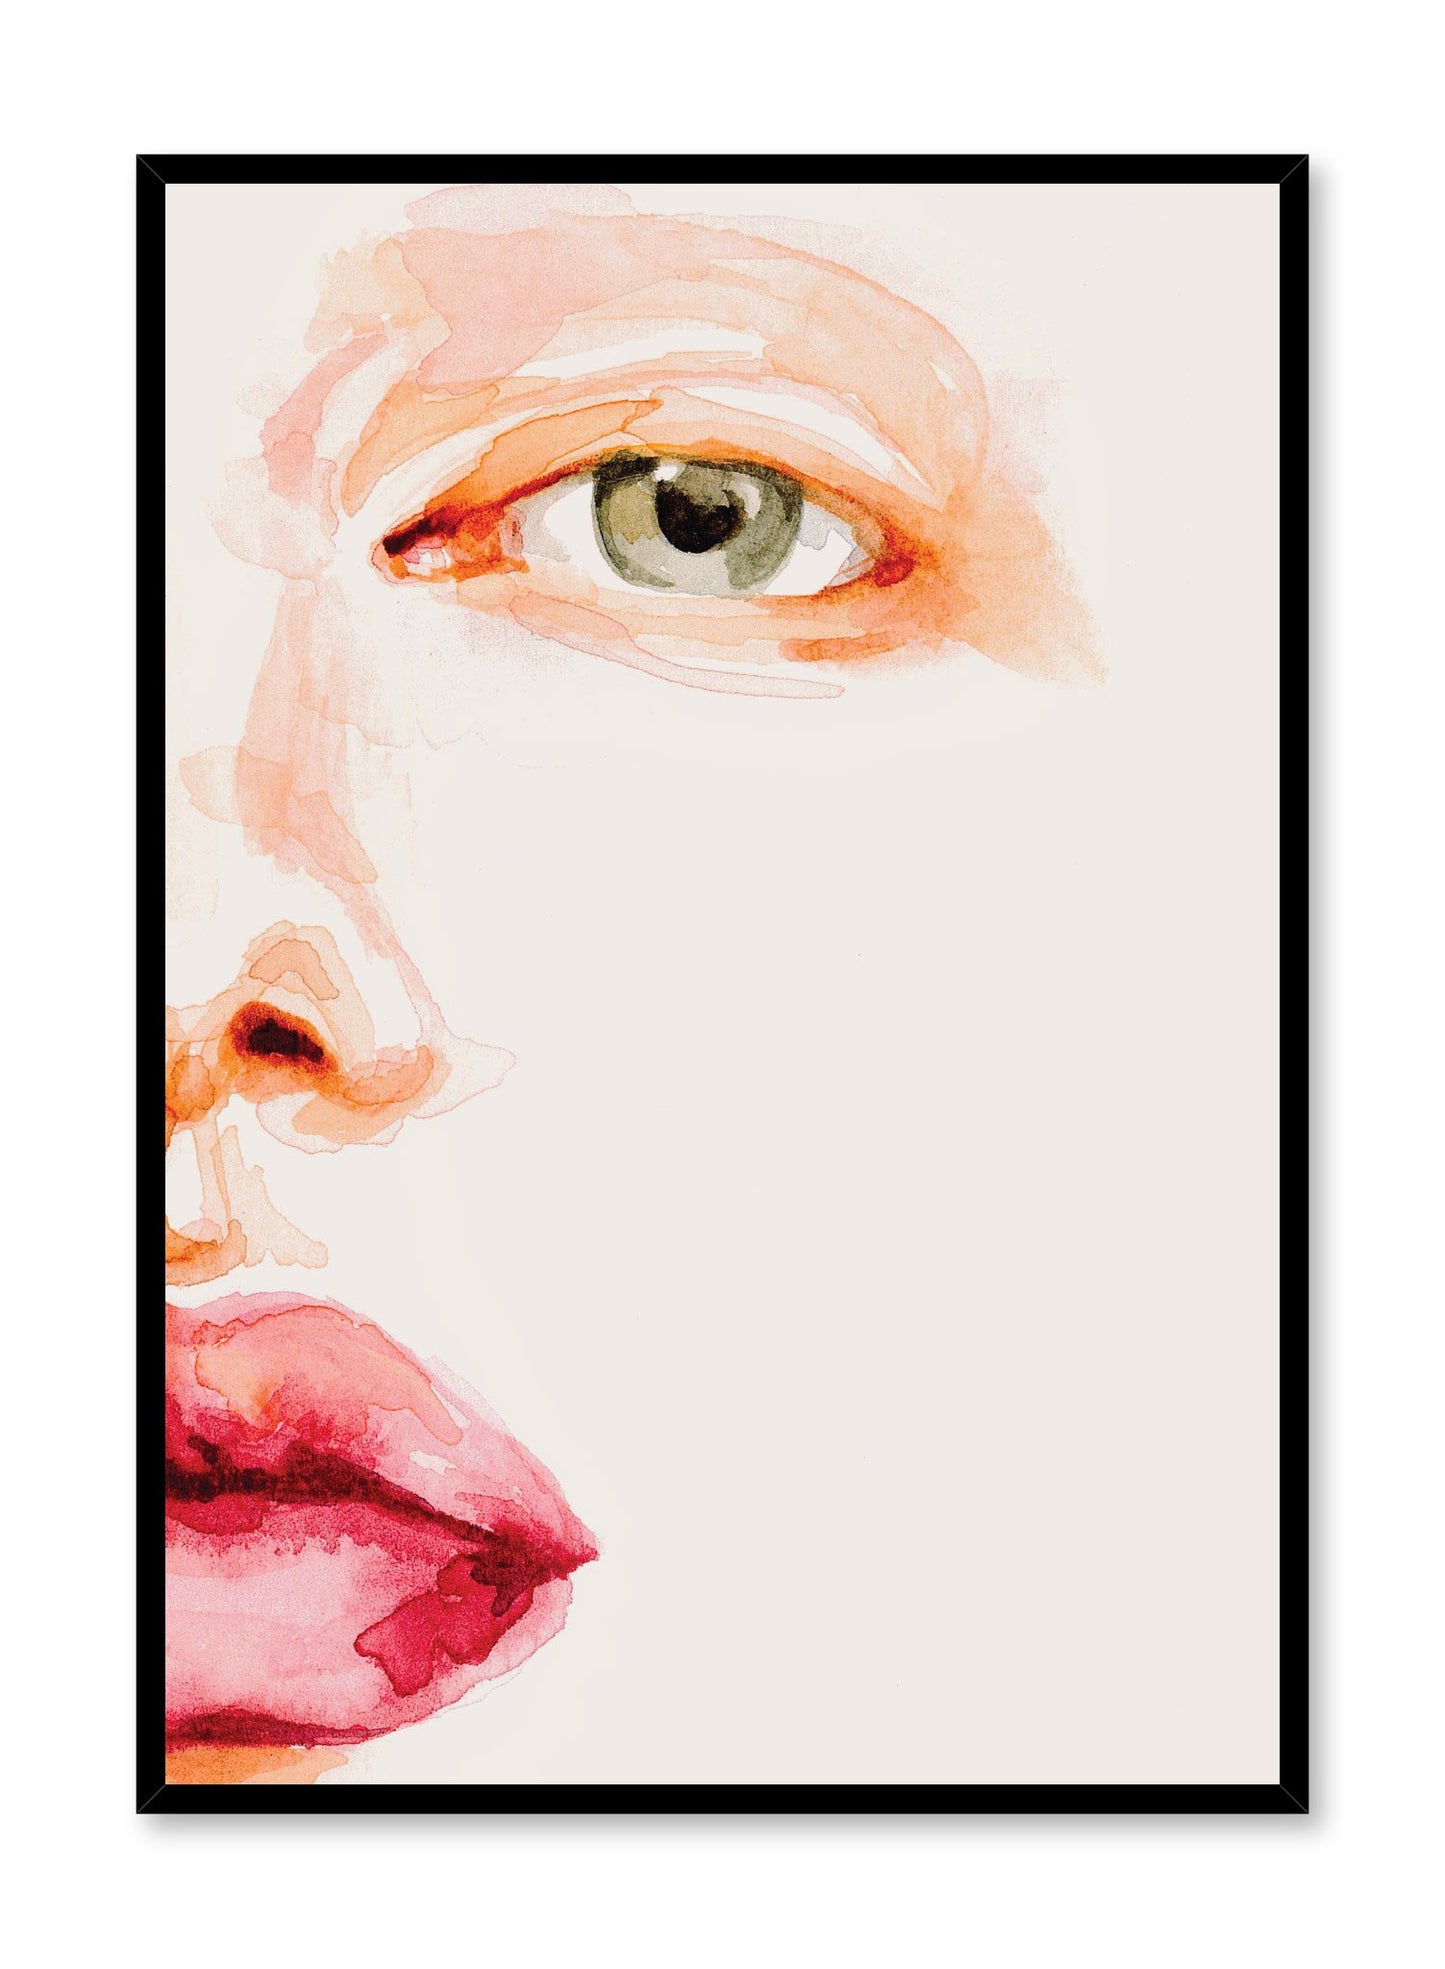 Fashion illustration poster by Opposite Wall with close up of face